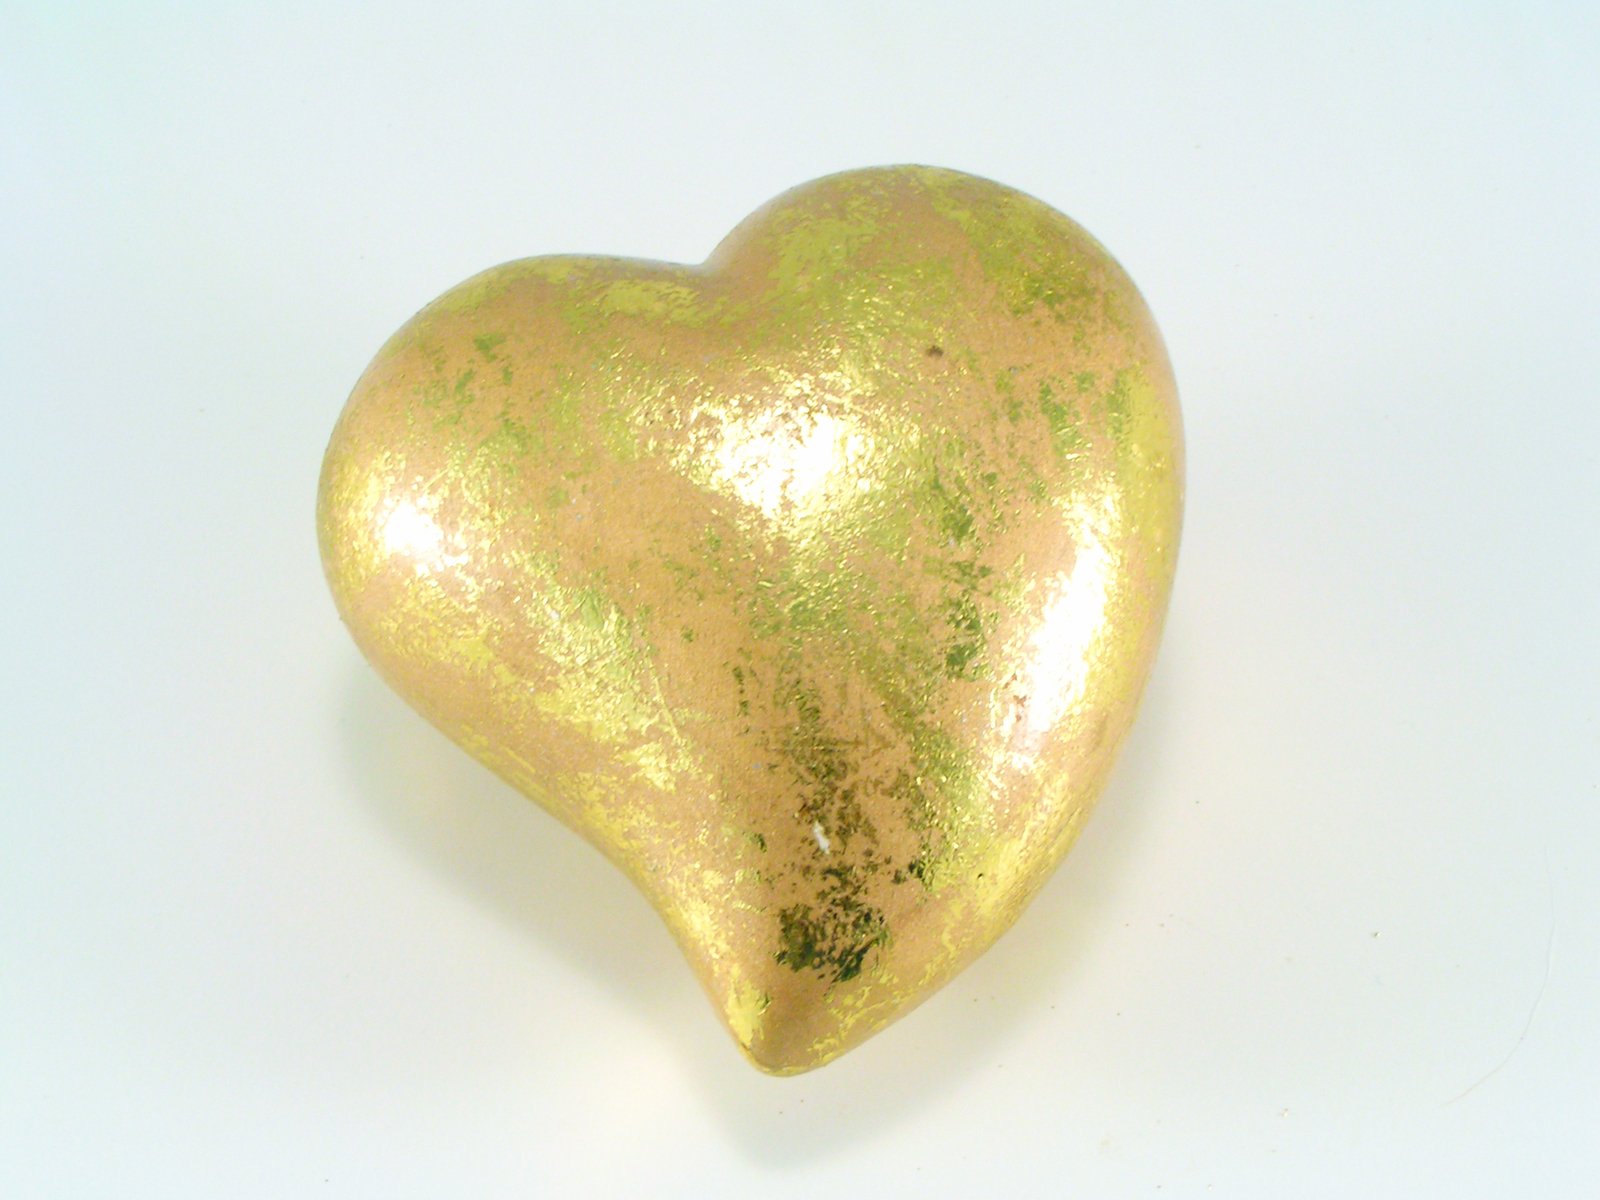 there is a gold heart with some kind of texture